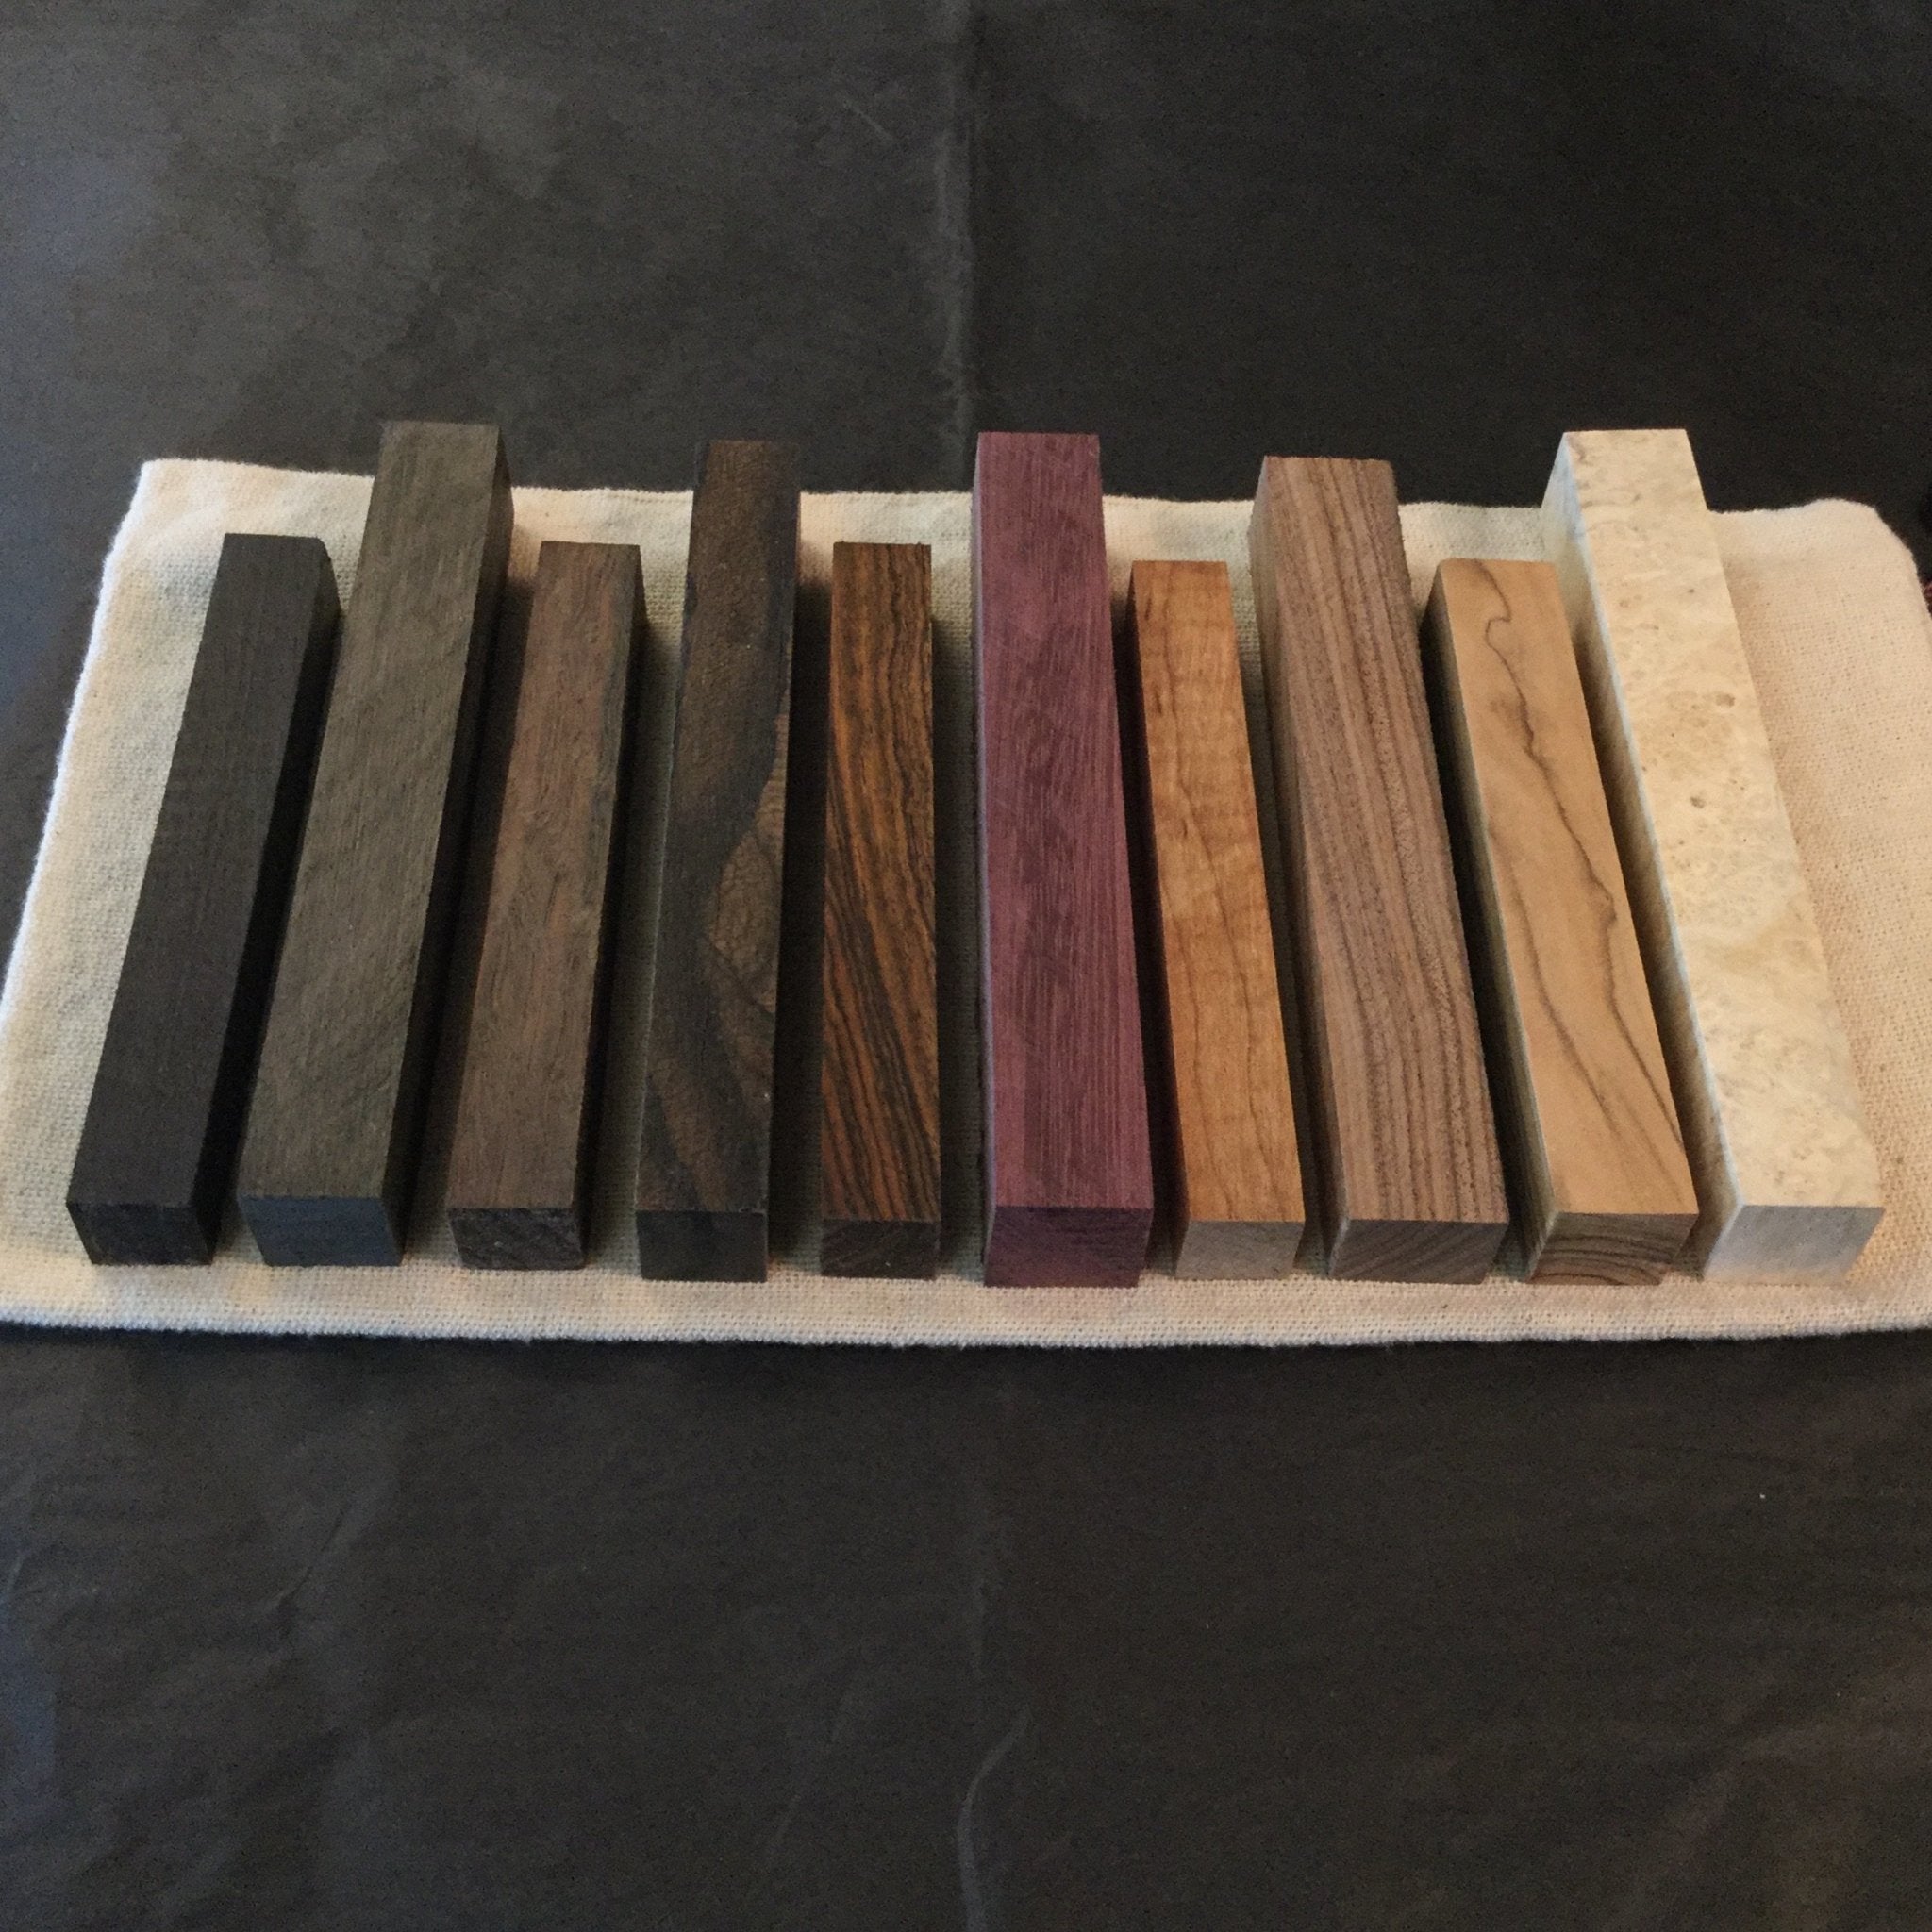 ZIRICOTE Wood Blanks, for Pen making, Crafting, Woodworking, Turning.